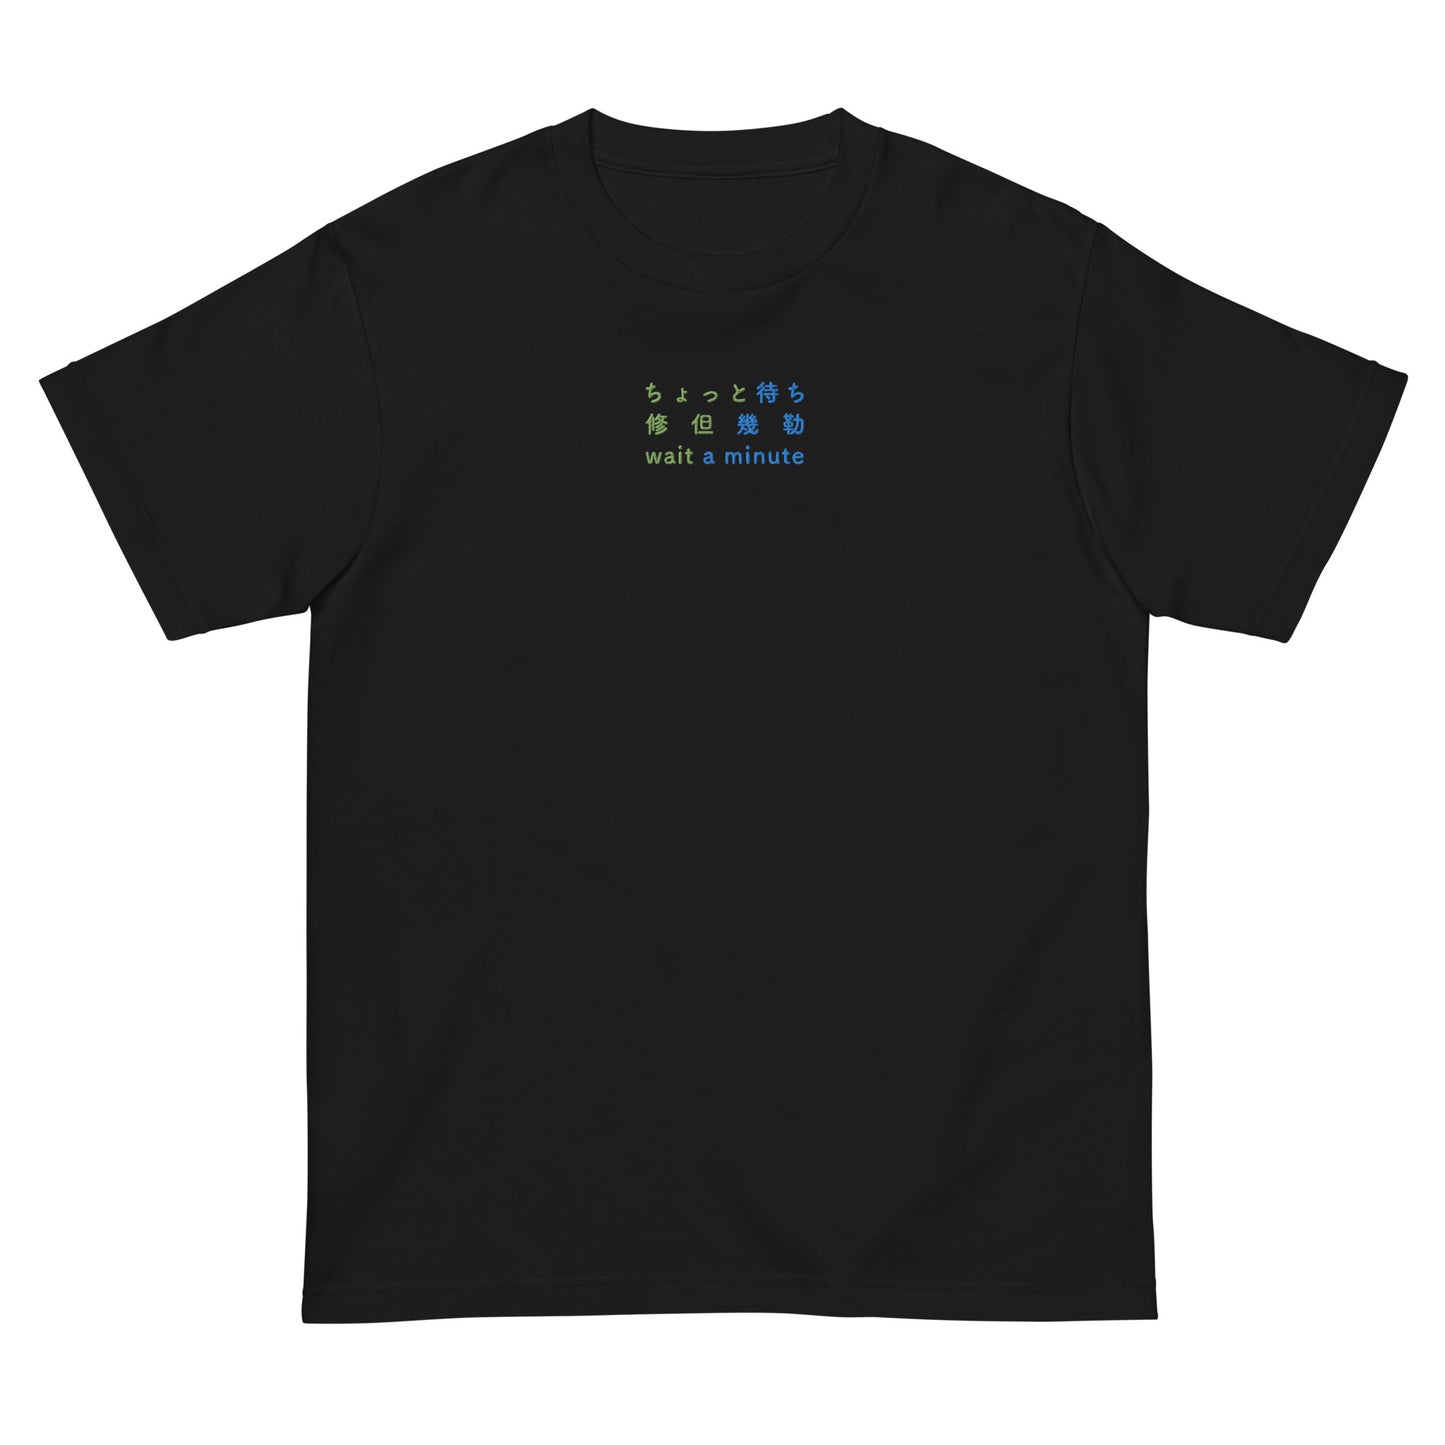 Black High Quality Tee - Front Design with an Green, Blue Embroidery "Wait A Minute" in Japanese,Chinese and English  Edit alt text